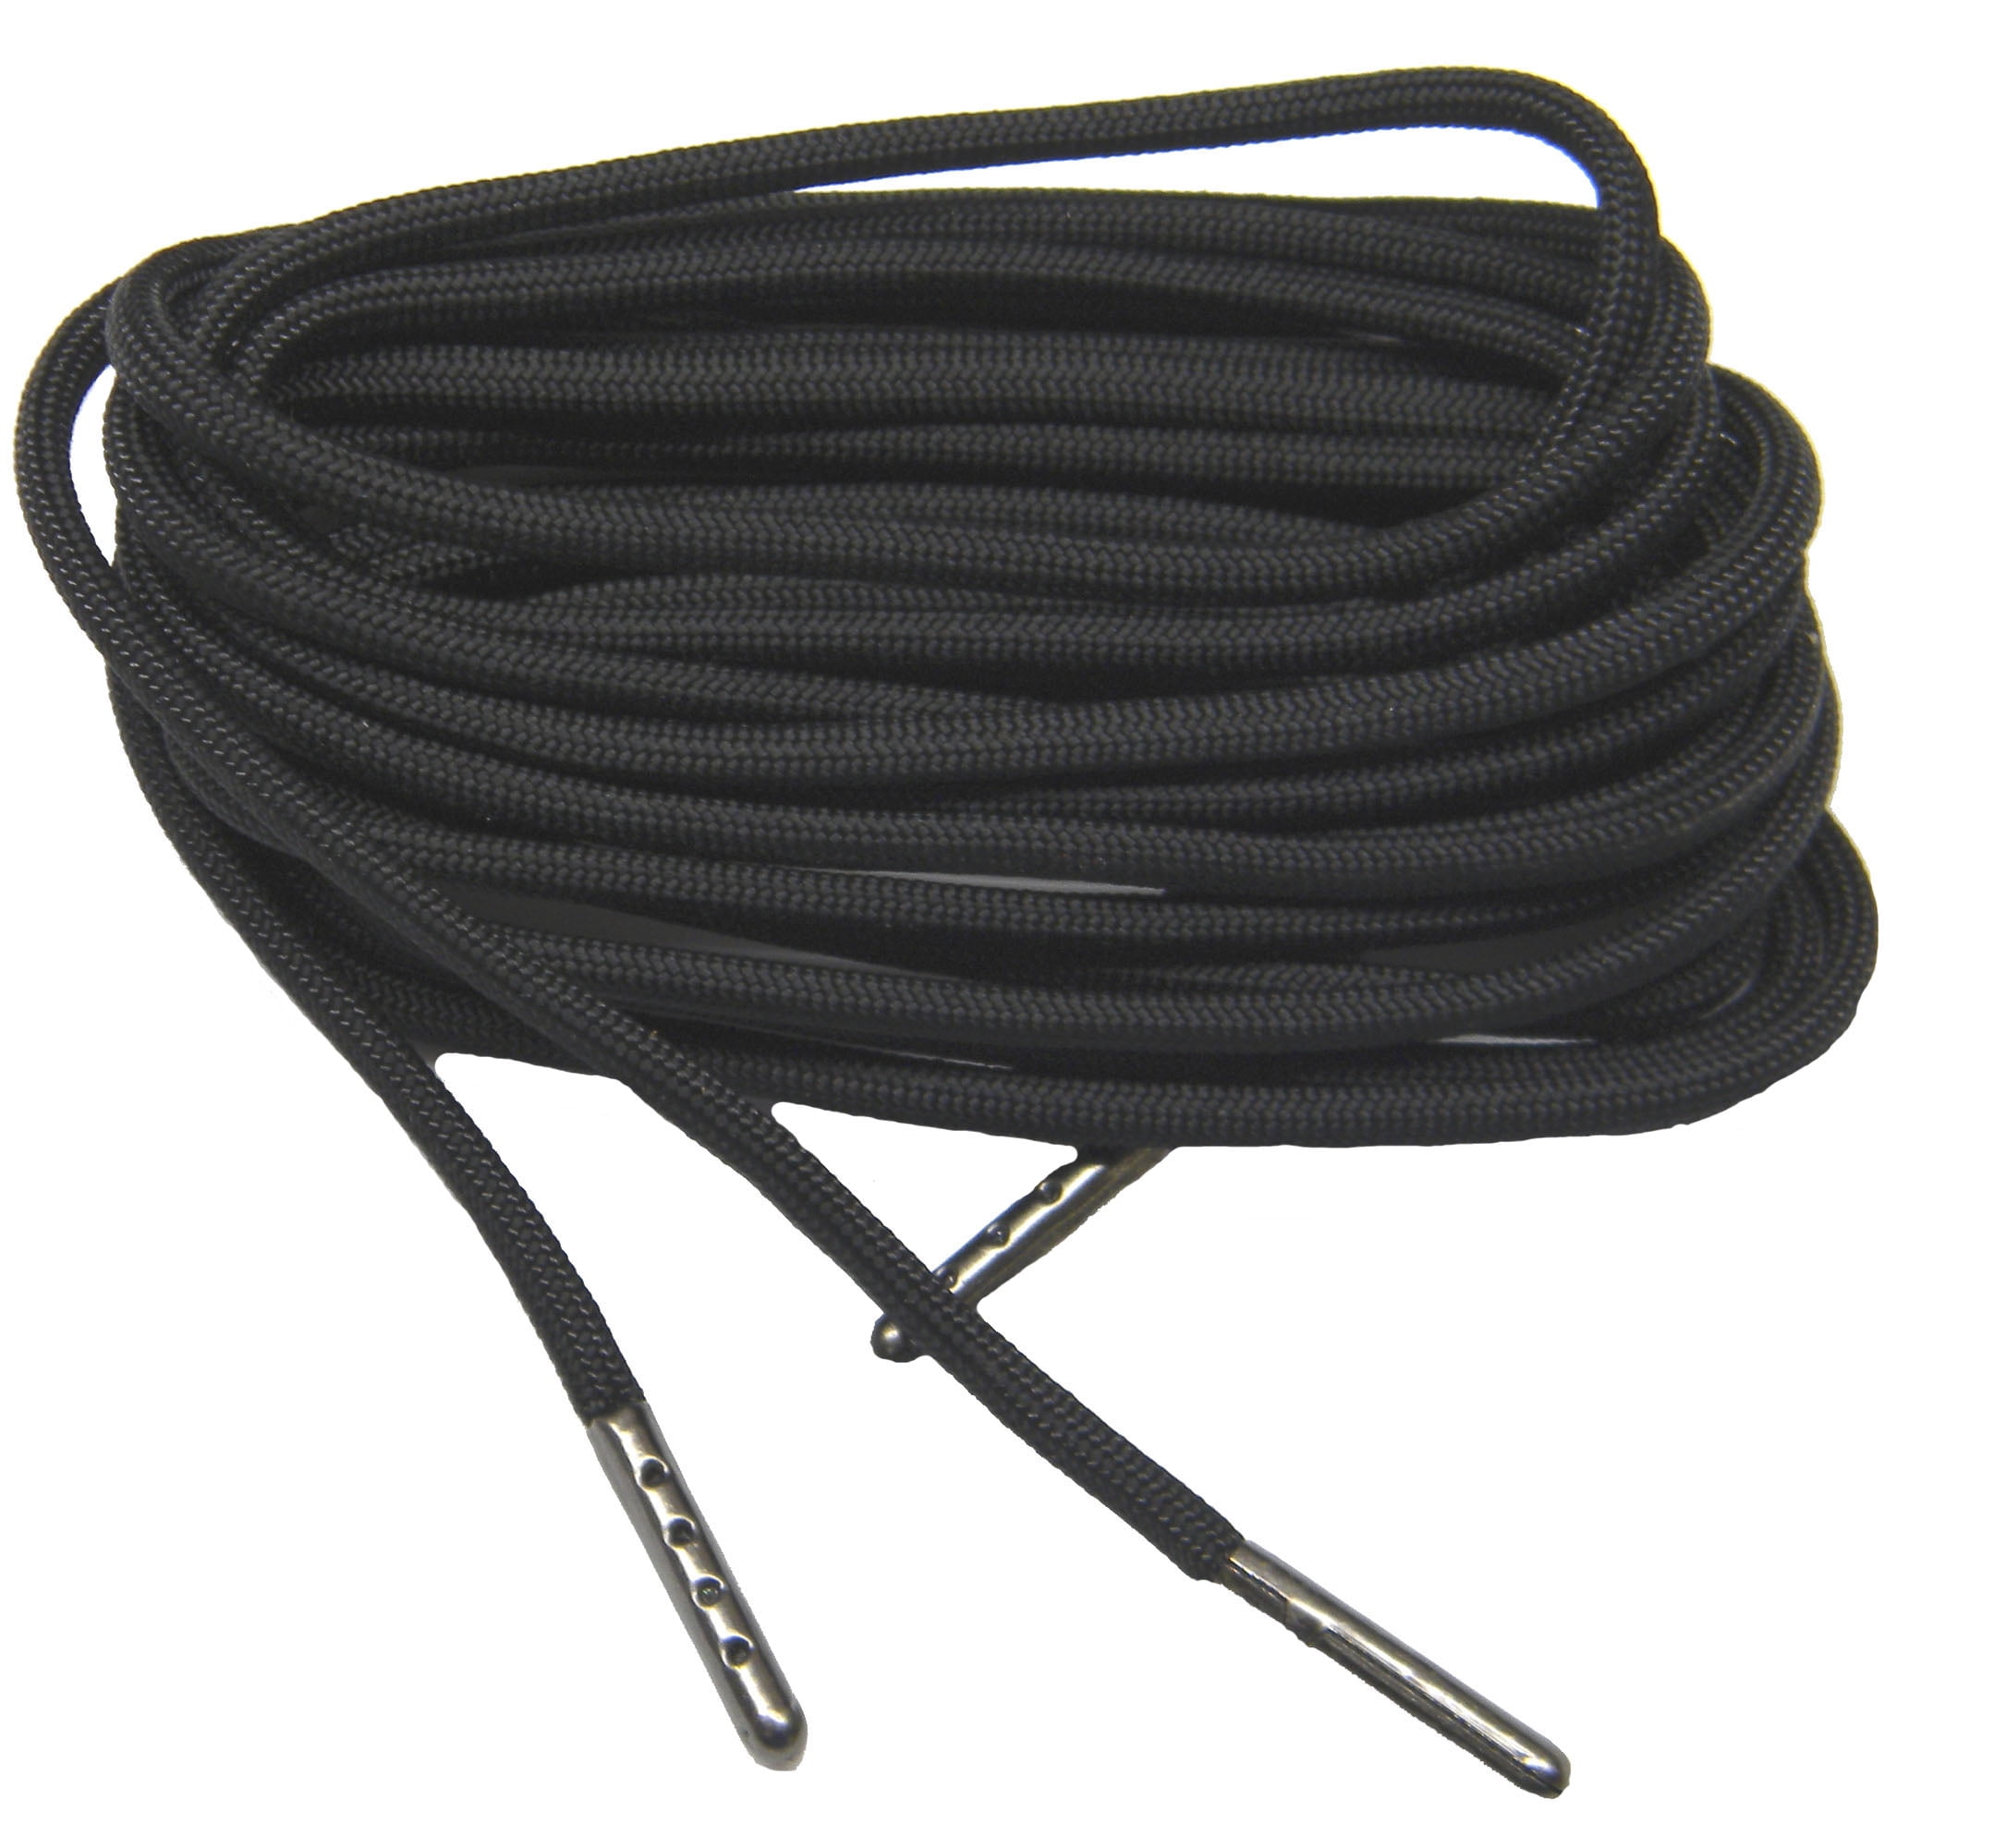 36 Inch 91 cm Black 550 Paracord with 